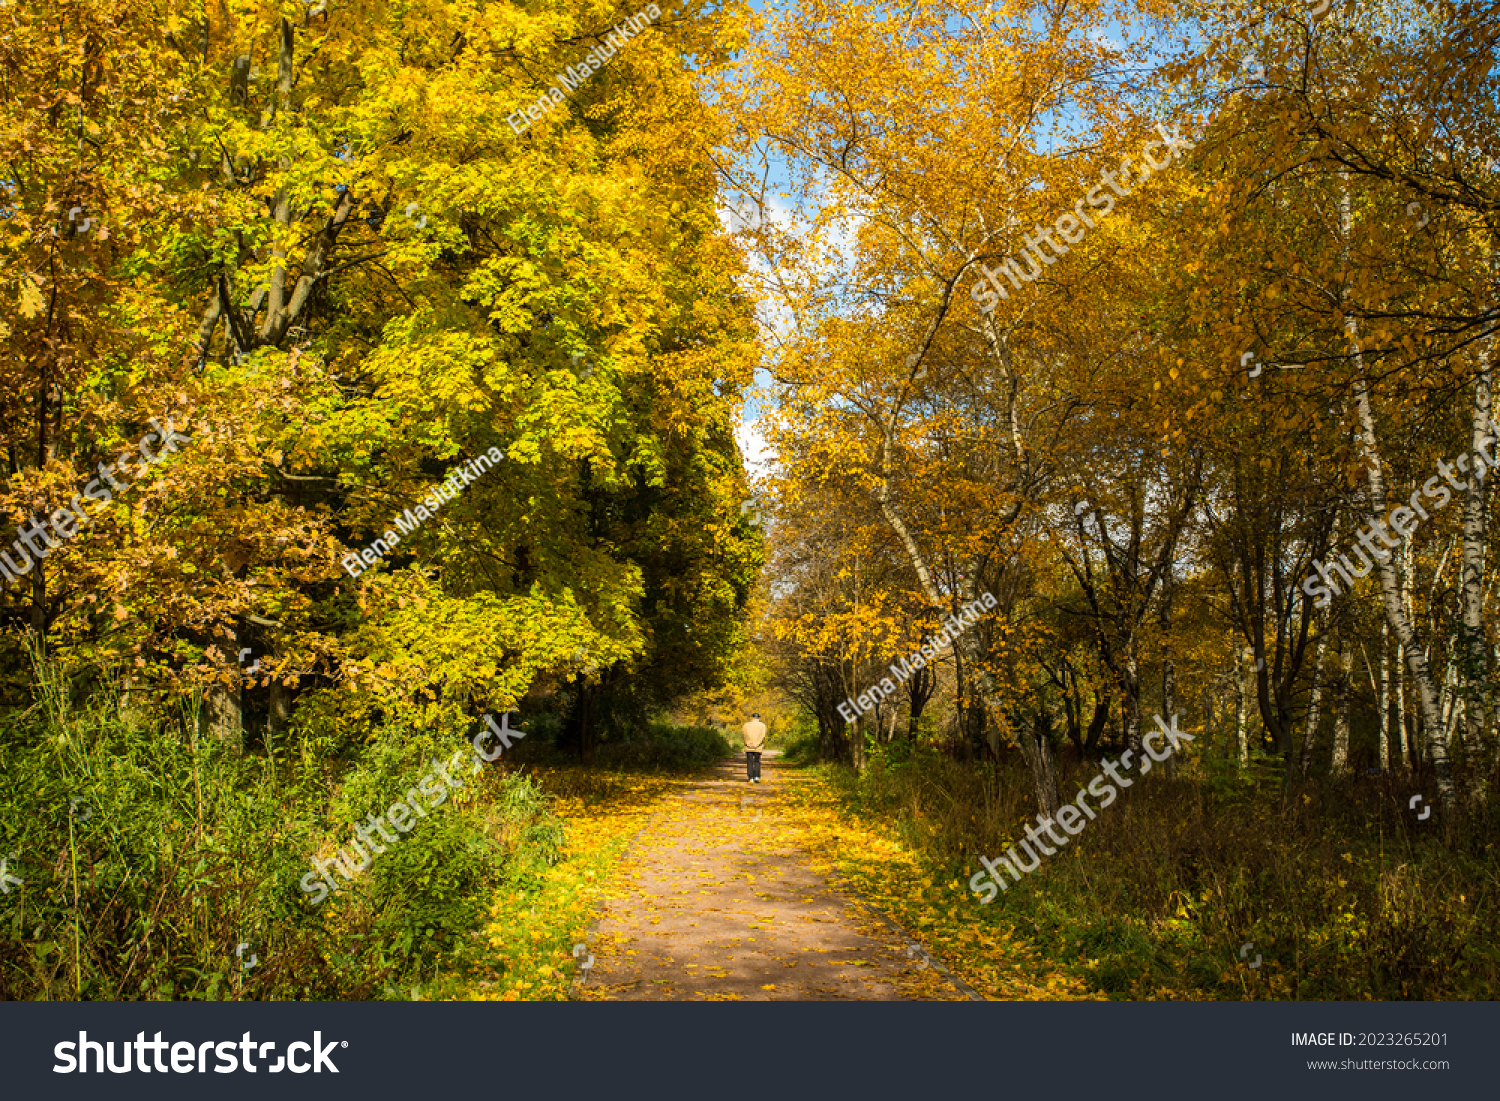 Beautiful Autumn Landscape With Walking Man On Walkway In Sunny Day In Park. #2023265201